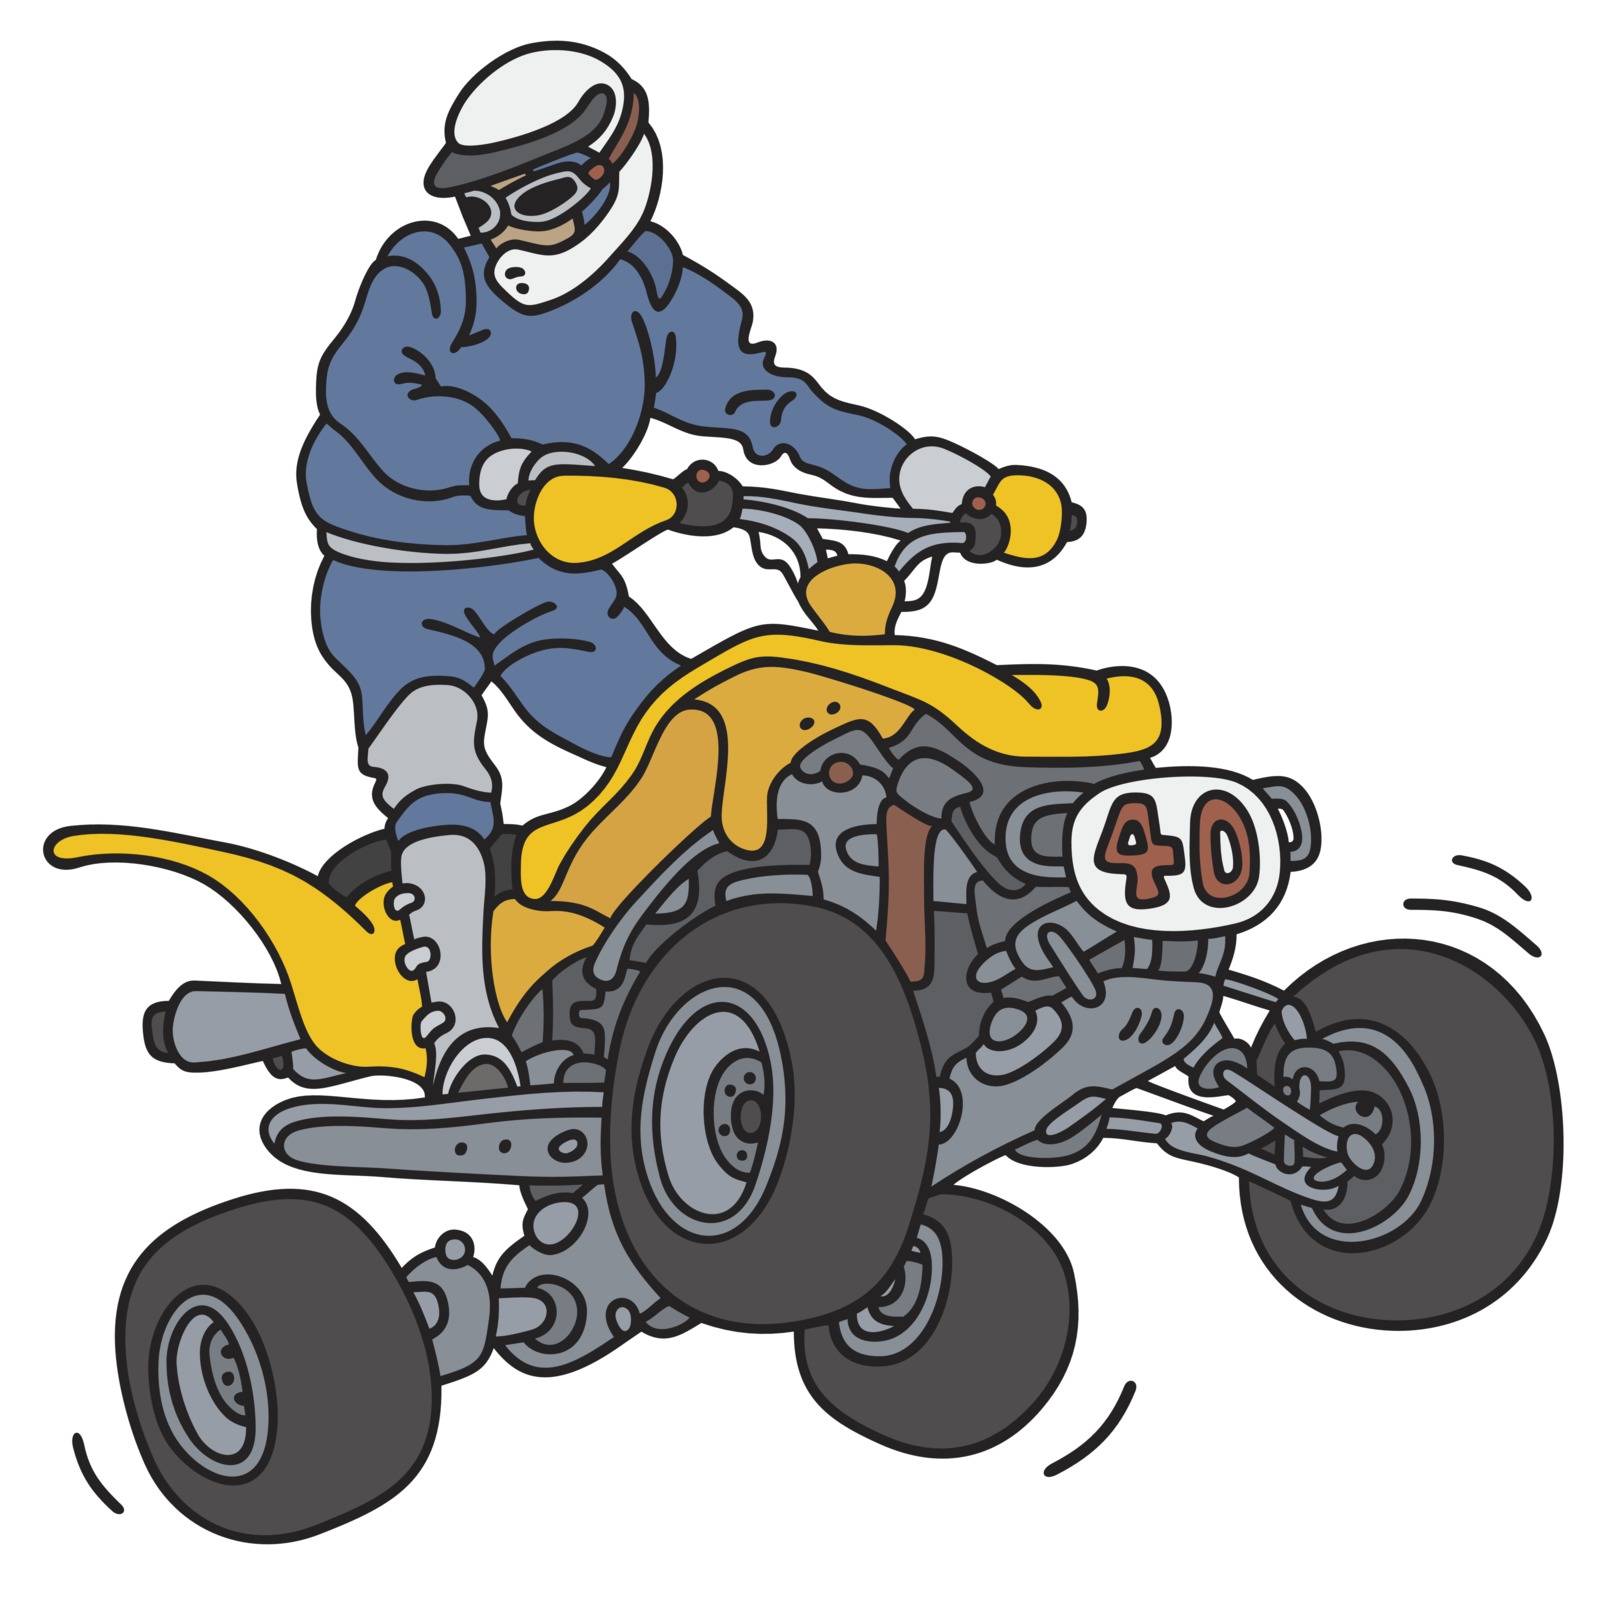 Hand drawing of a rider on the all terrain vehicle - not a real model